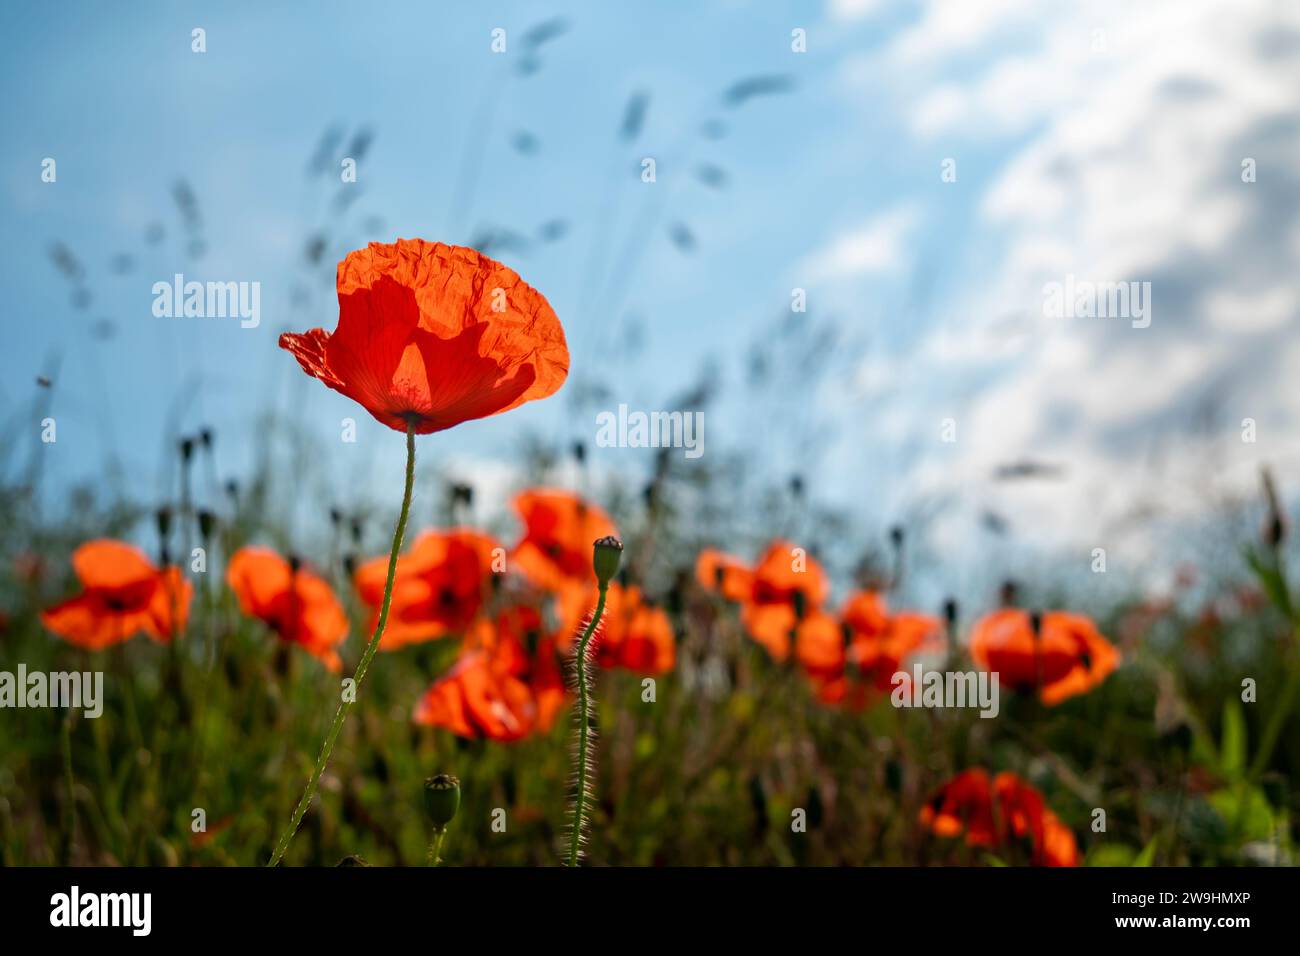 Red poppy field against blue sky on a beautiful summer day. Shallow depth of field with focus on single flower. Stock Photo